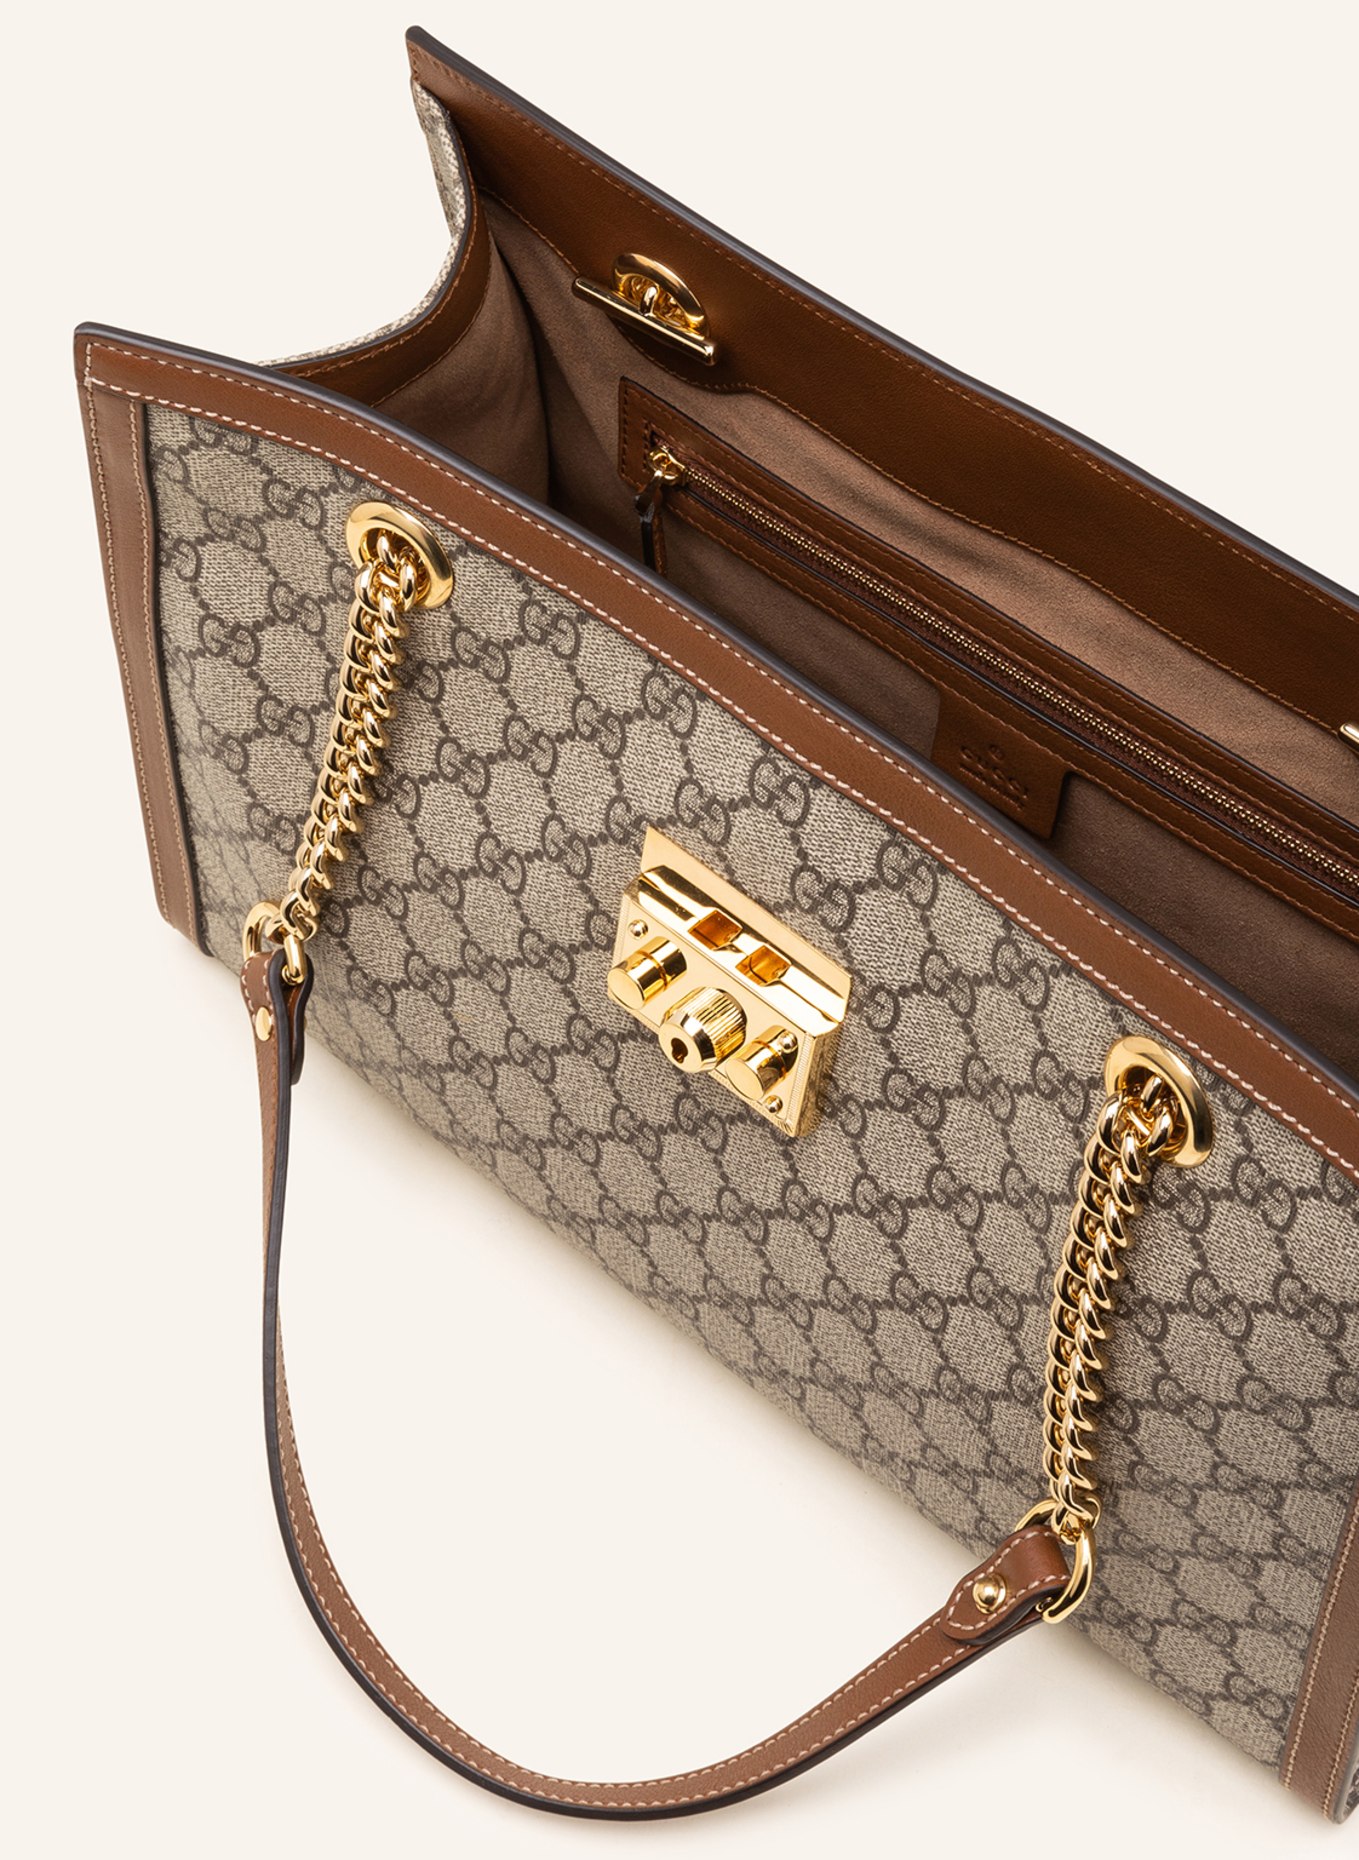 Gucci Bags outlet - 1800 products on sale | FASHIOLA.co.uk